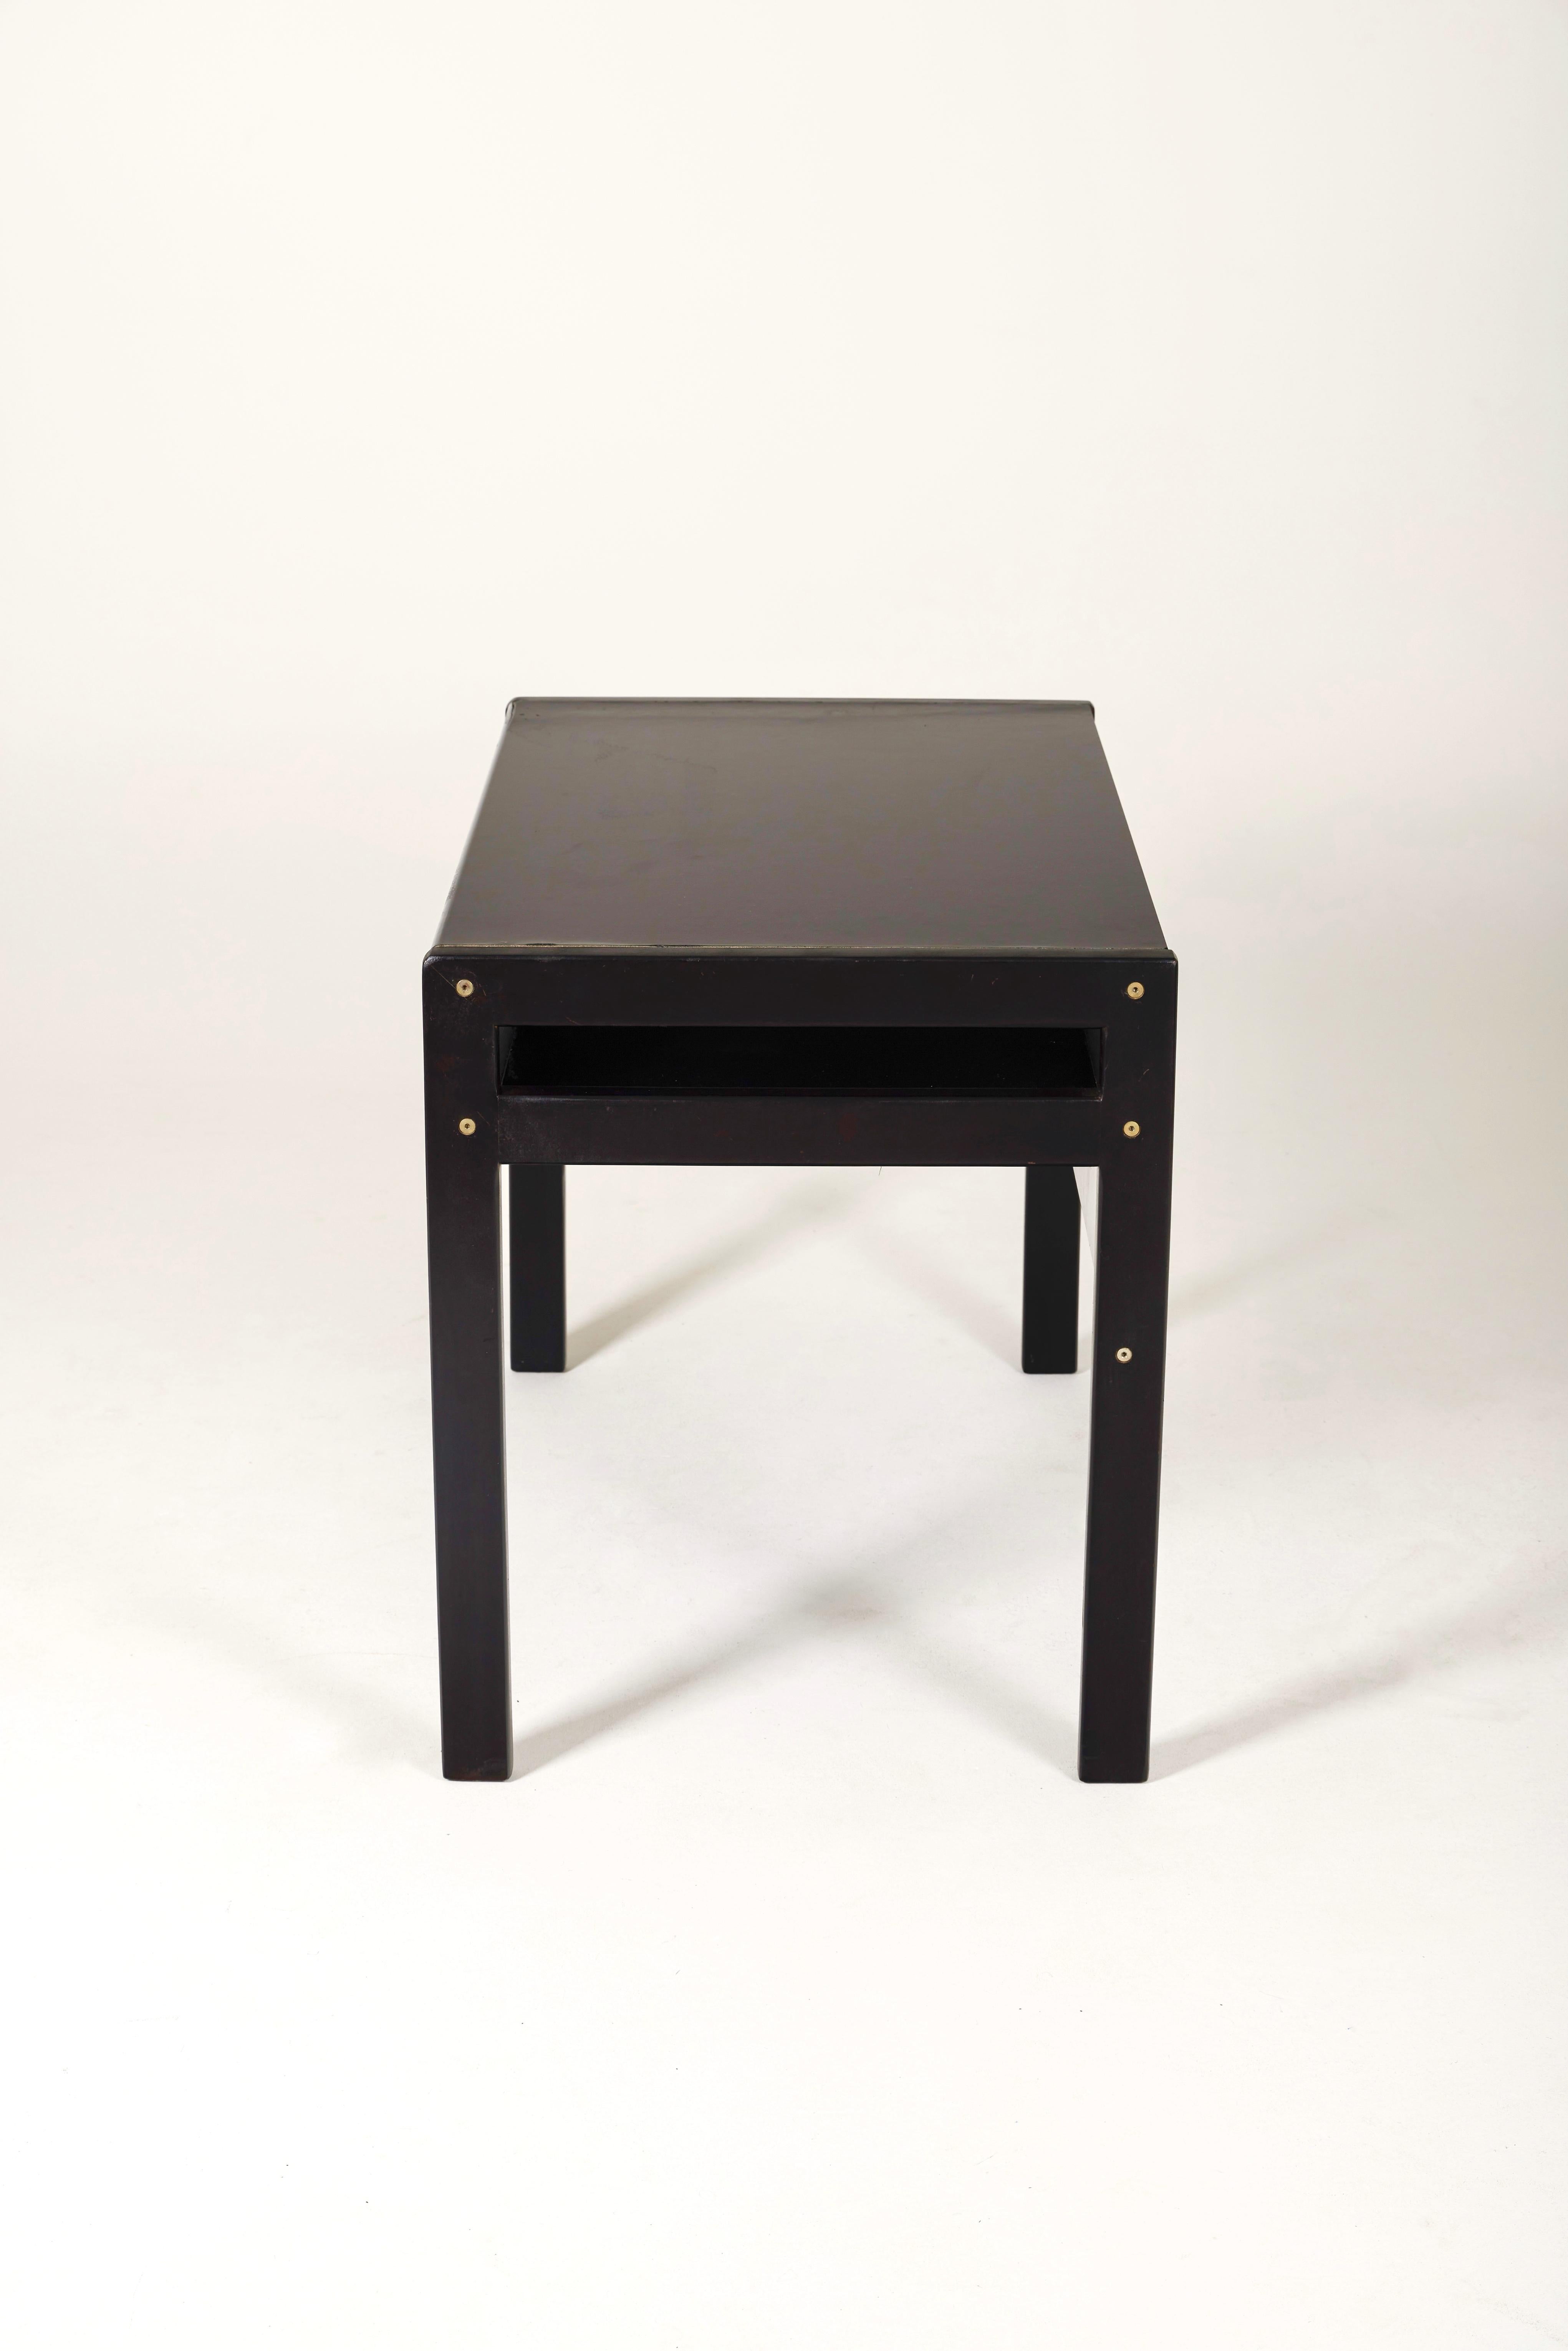 Wood André Sornay Black Lacquered Desk, 1960s